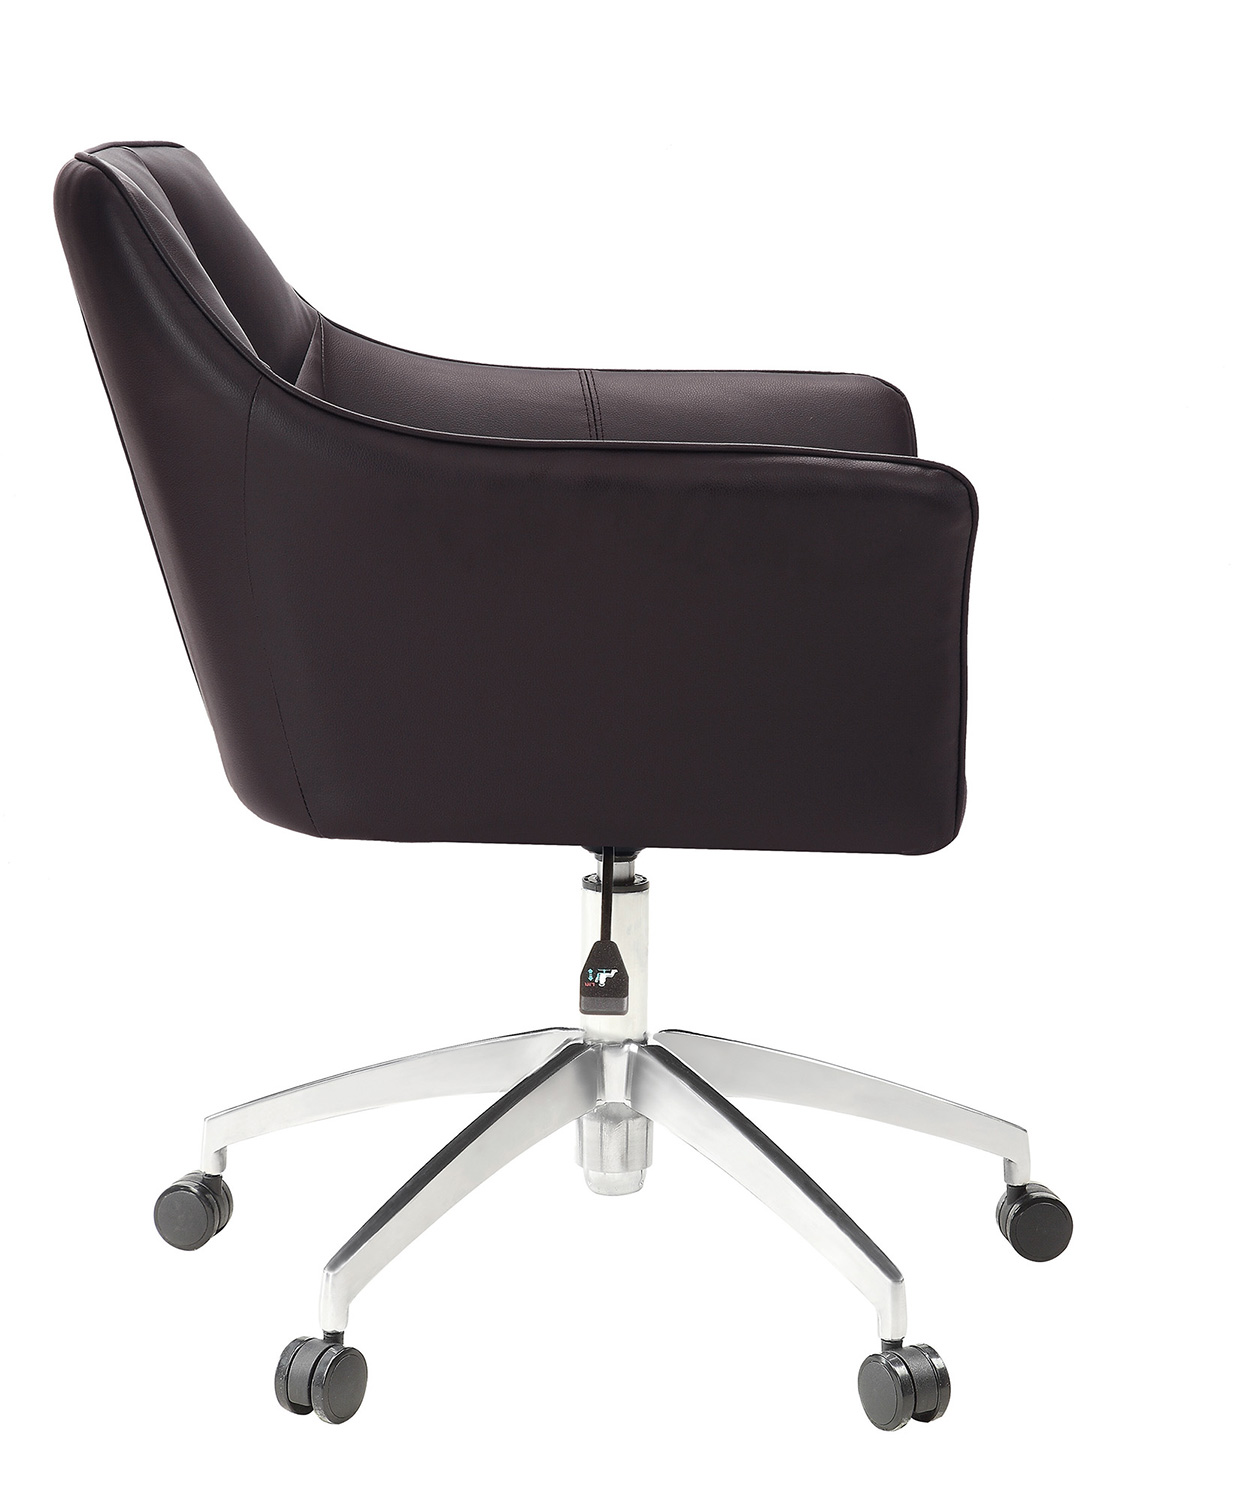 Coaster 801539 Office Chair - Brown/Aluminum